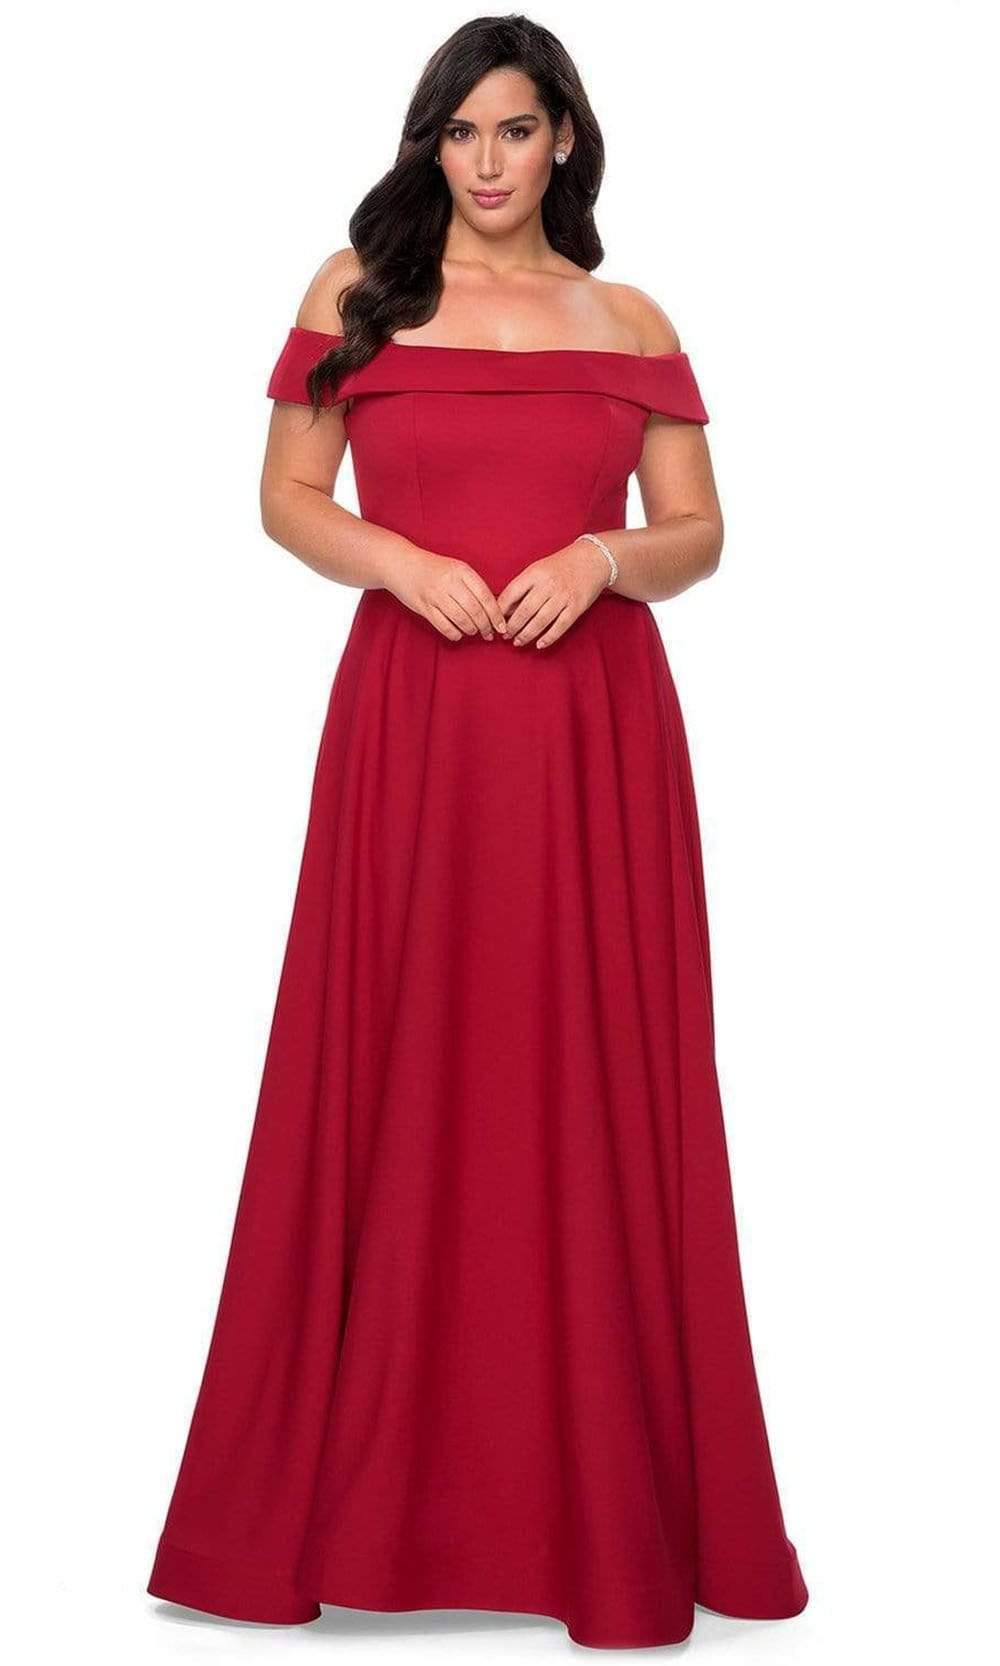 La Femme - Foldover Off Shoulder Evening Gown 29007SC - 1 pc Red In Size 12W Available CCSALE 12W / Red